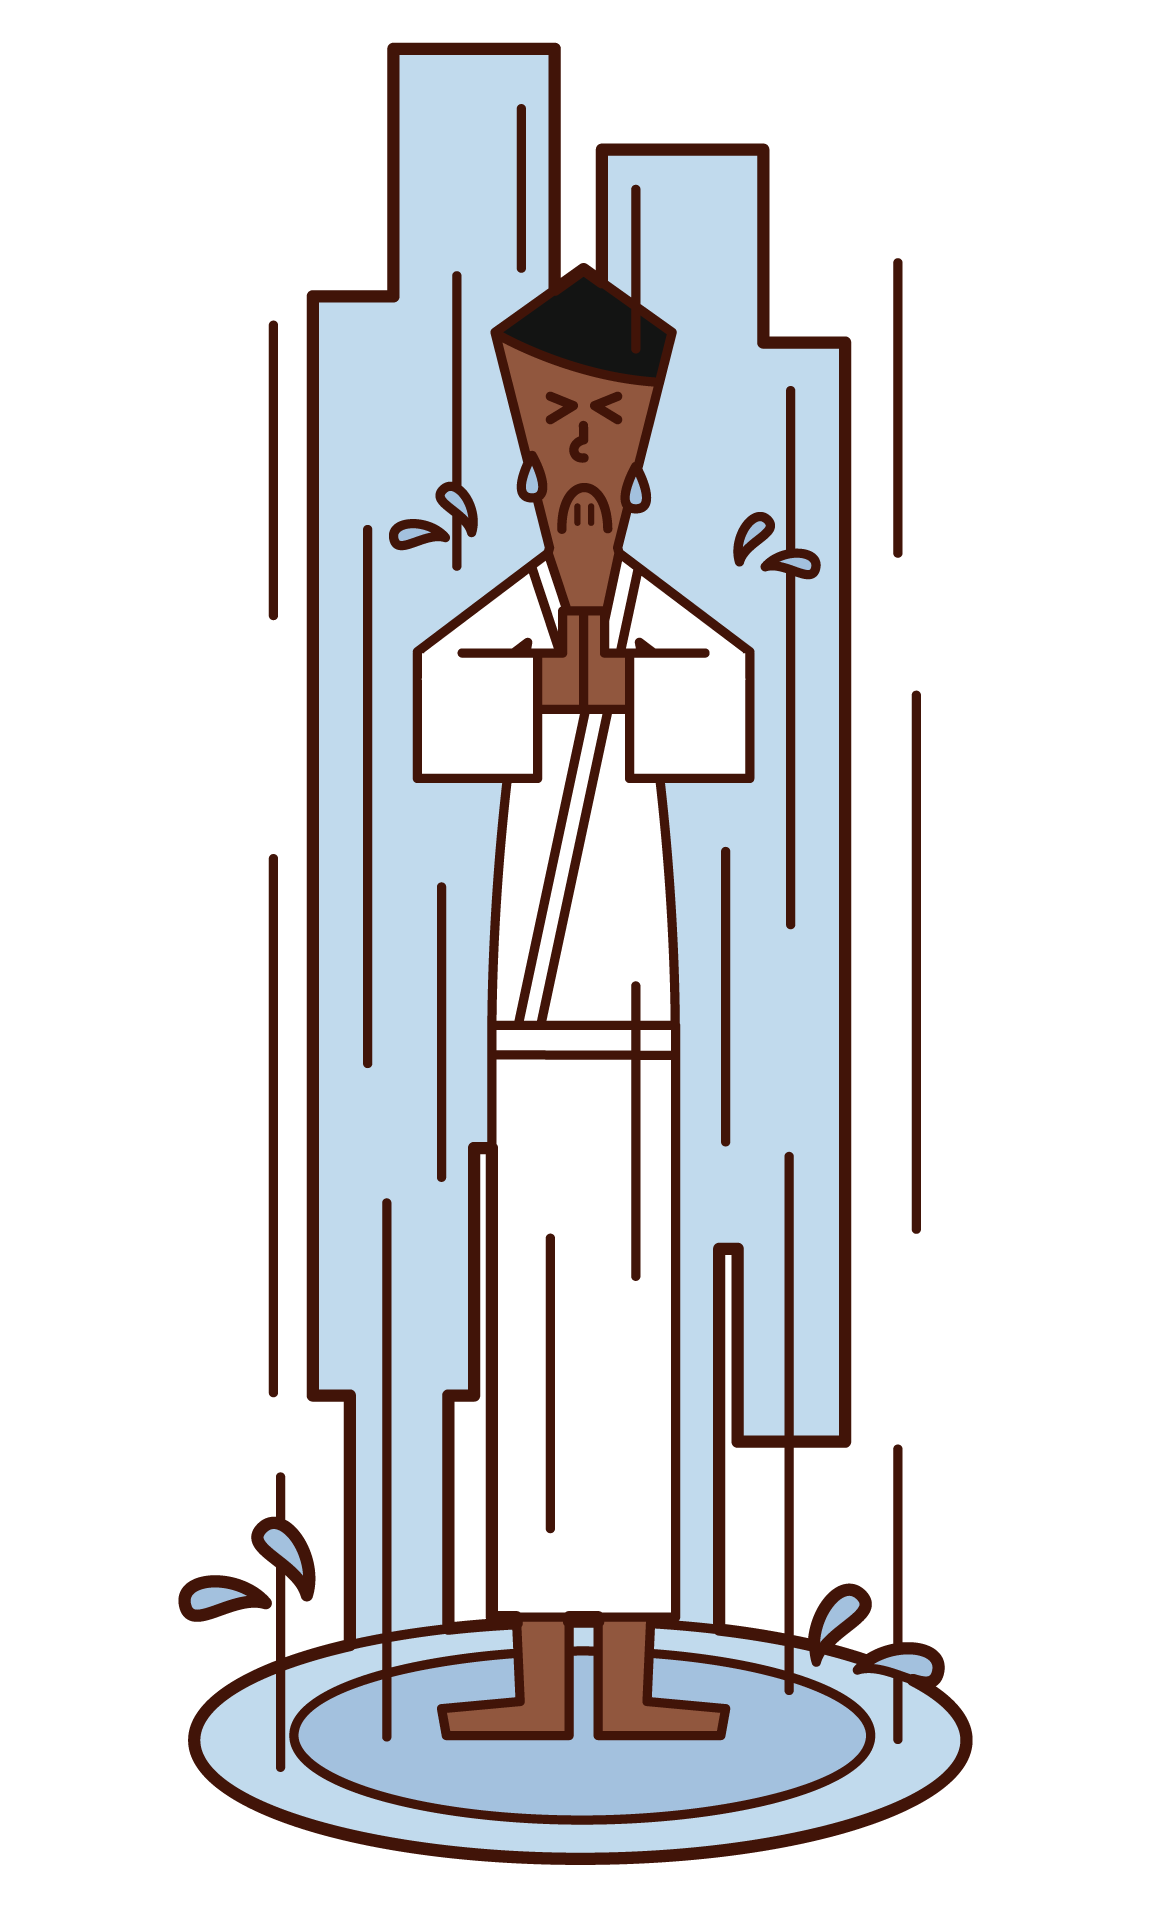 Illustration of a man doing a waterfall line